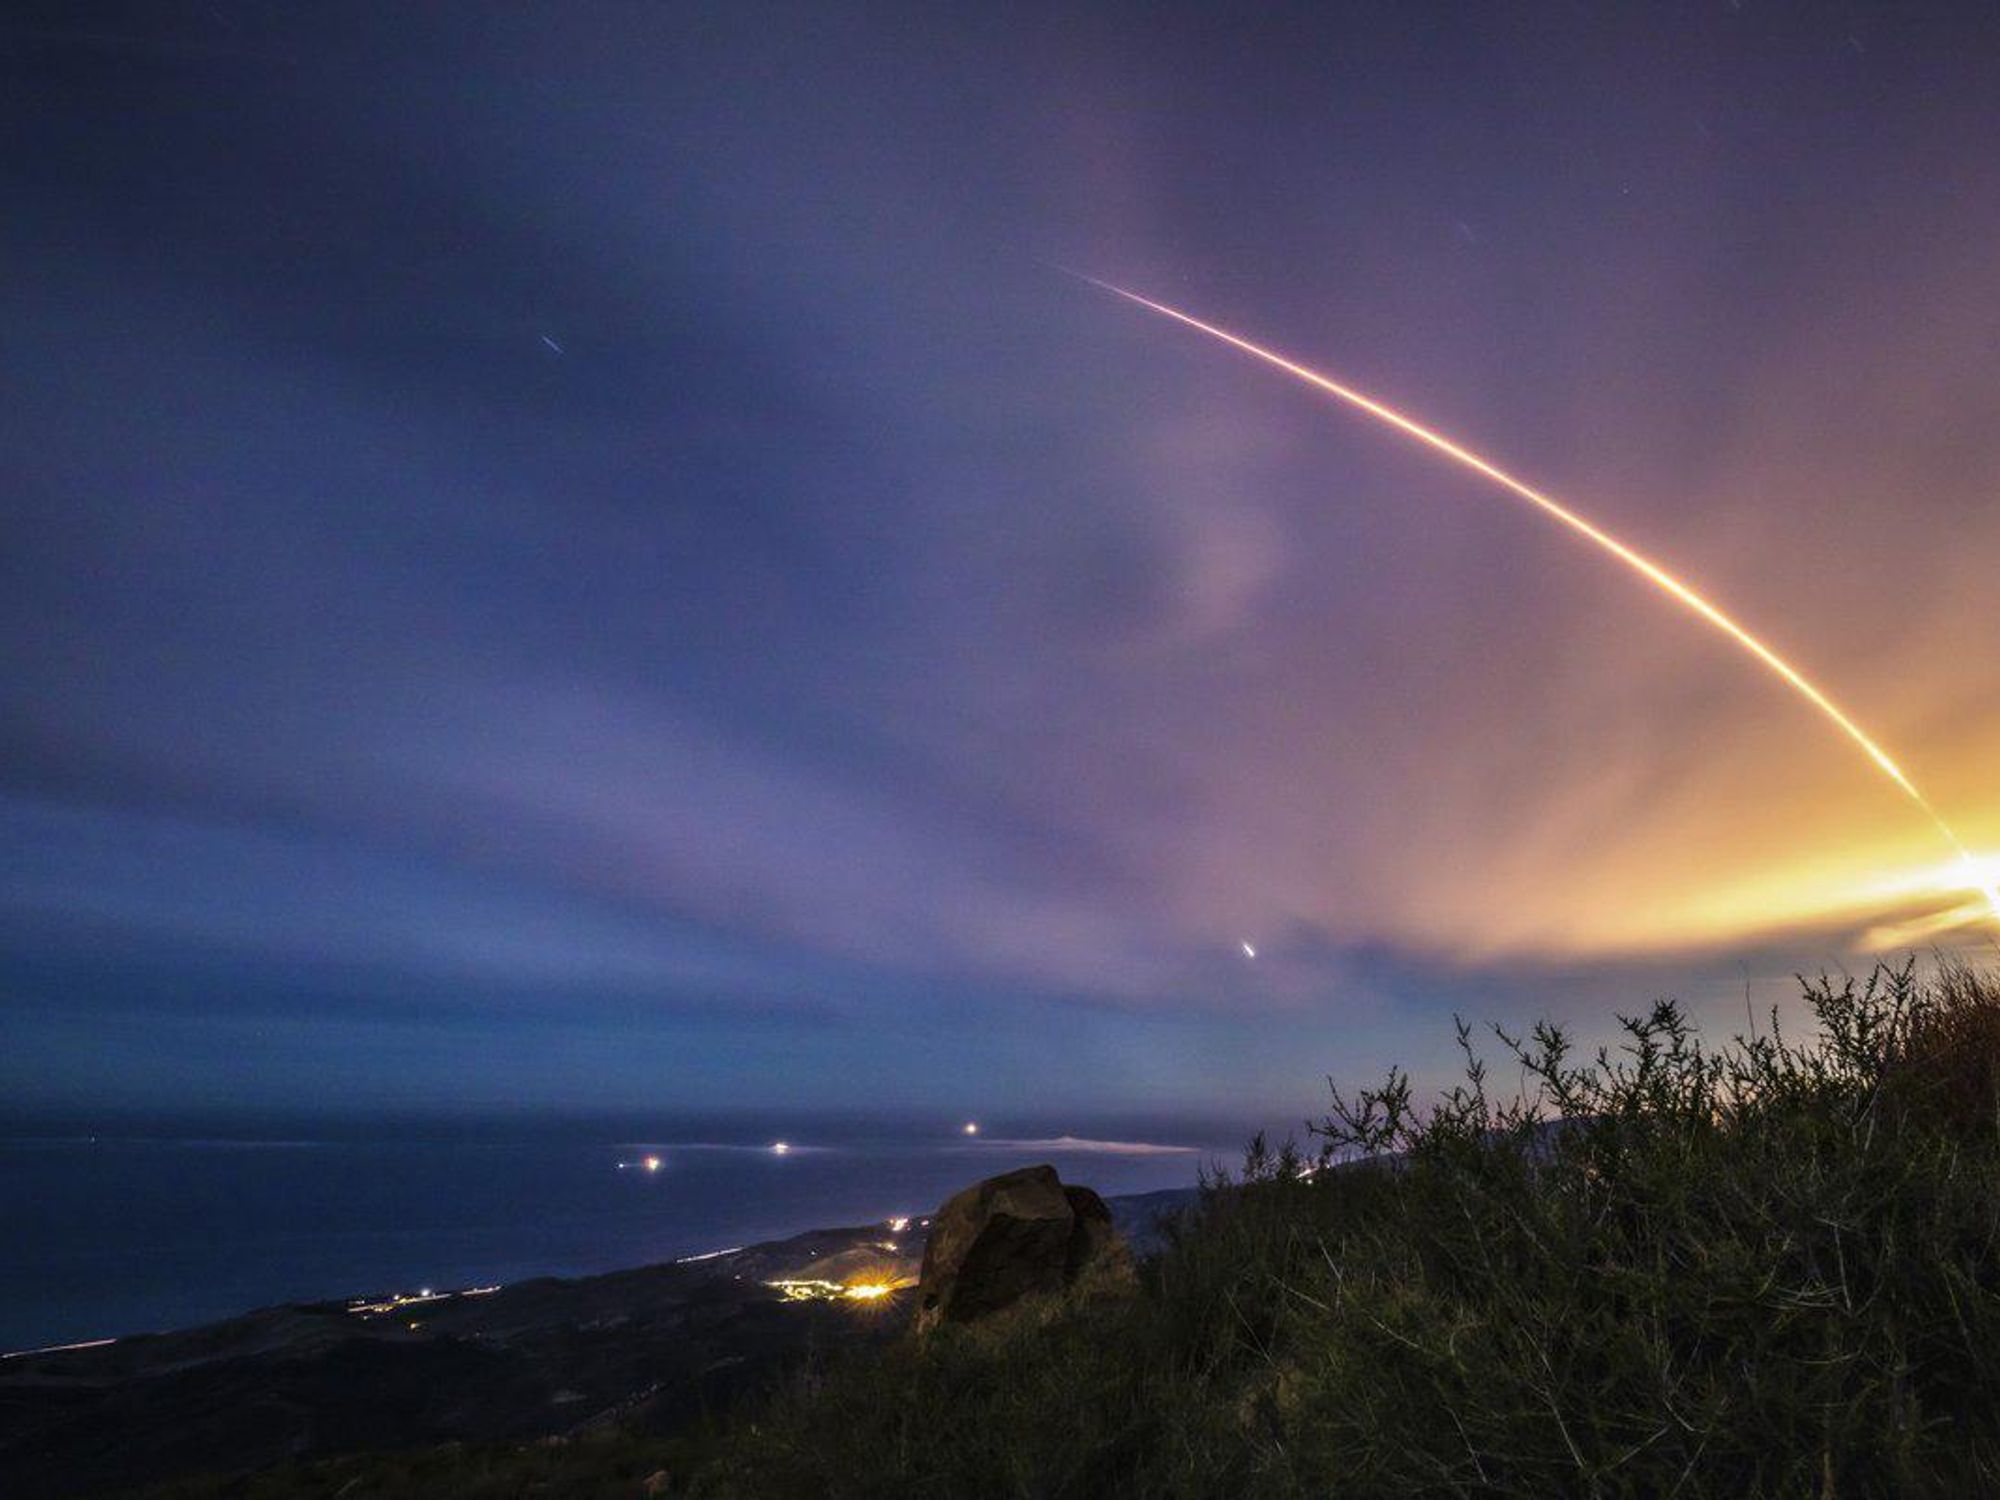 Why SpaceX is Crashing a Craft into an Asteroid (on Purpose)